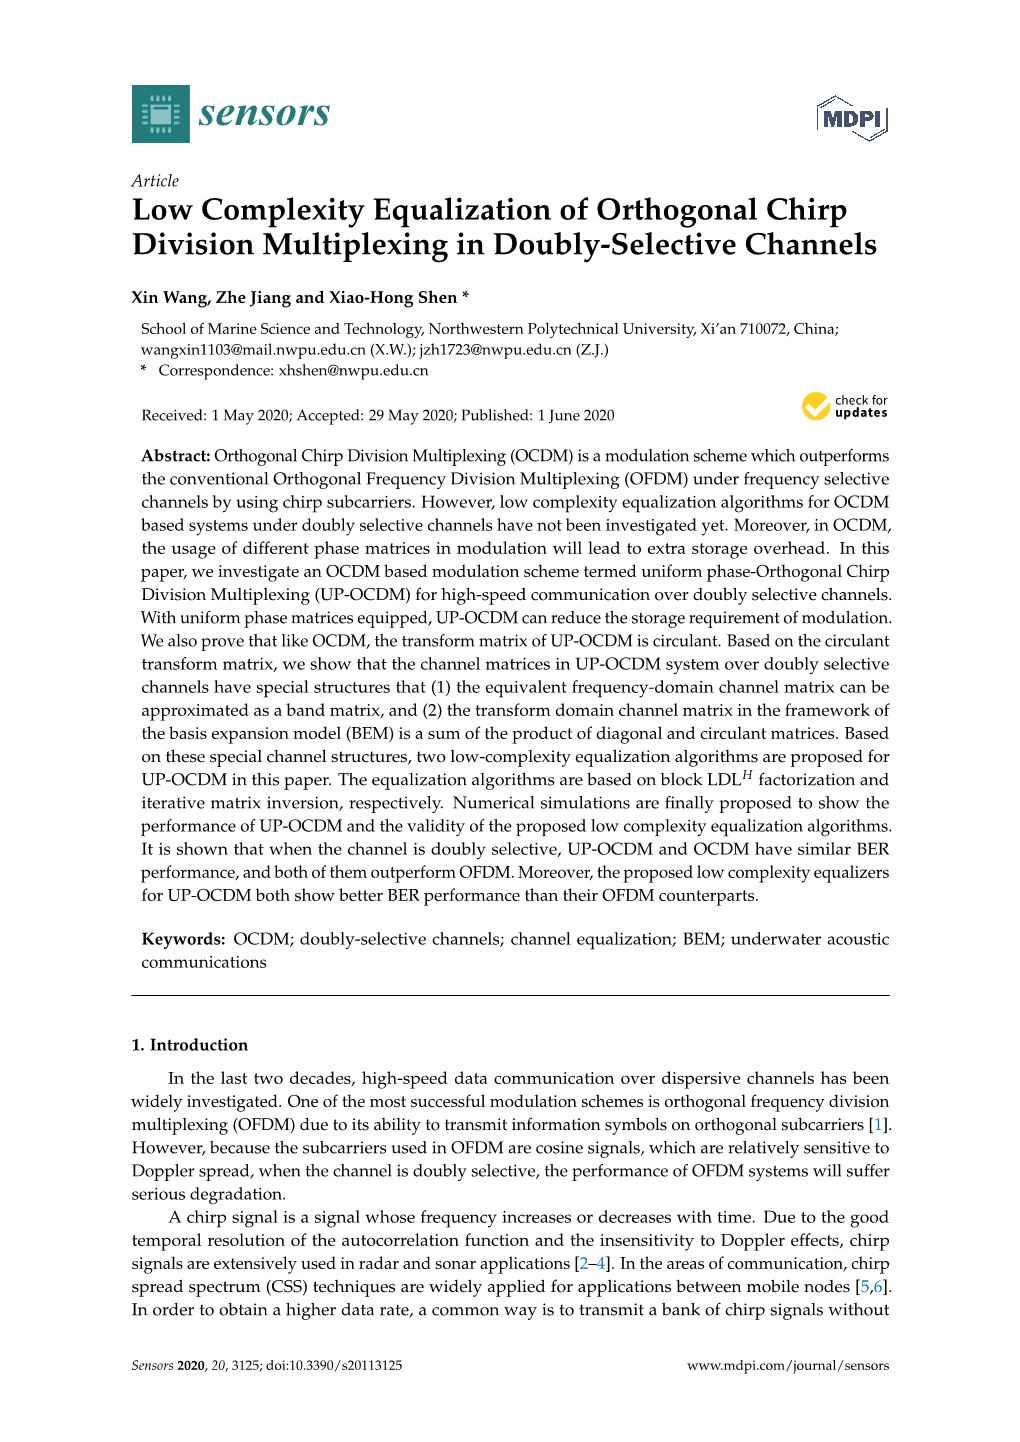 Low Complexity Equalization of Orthogonal Chirp Division Multiplexing in Doubly-Selective Channels